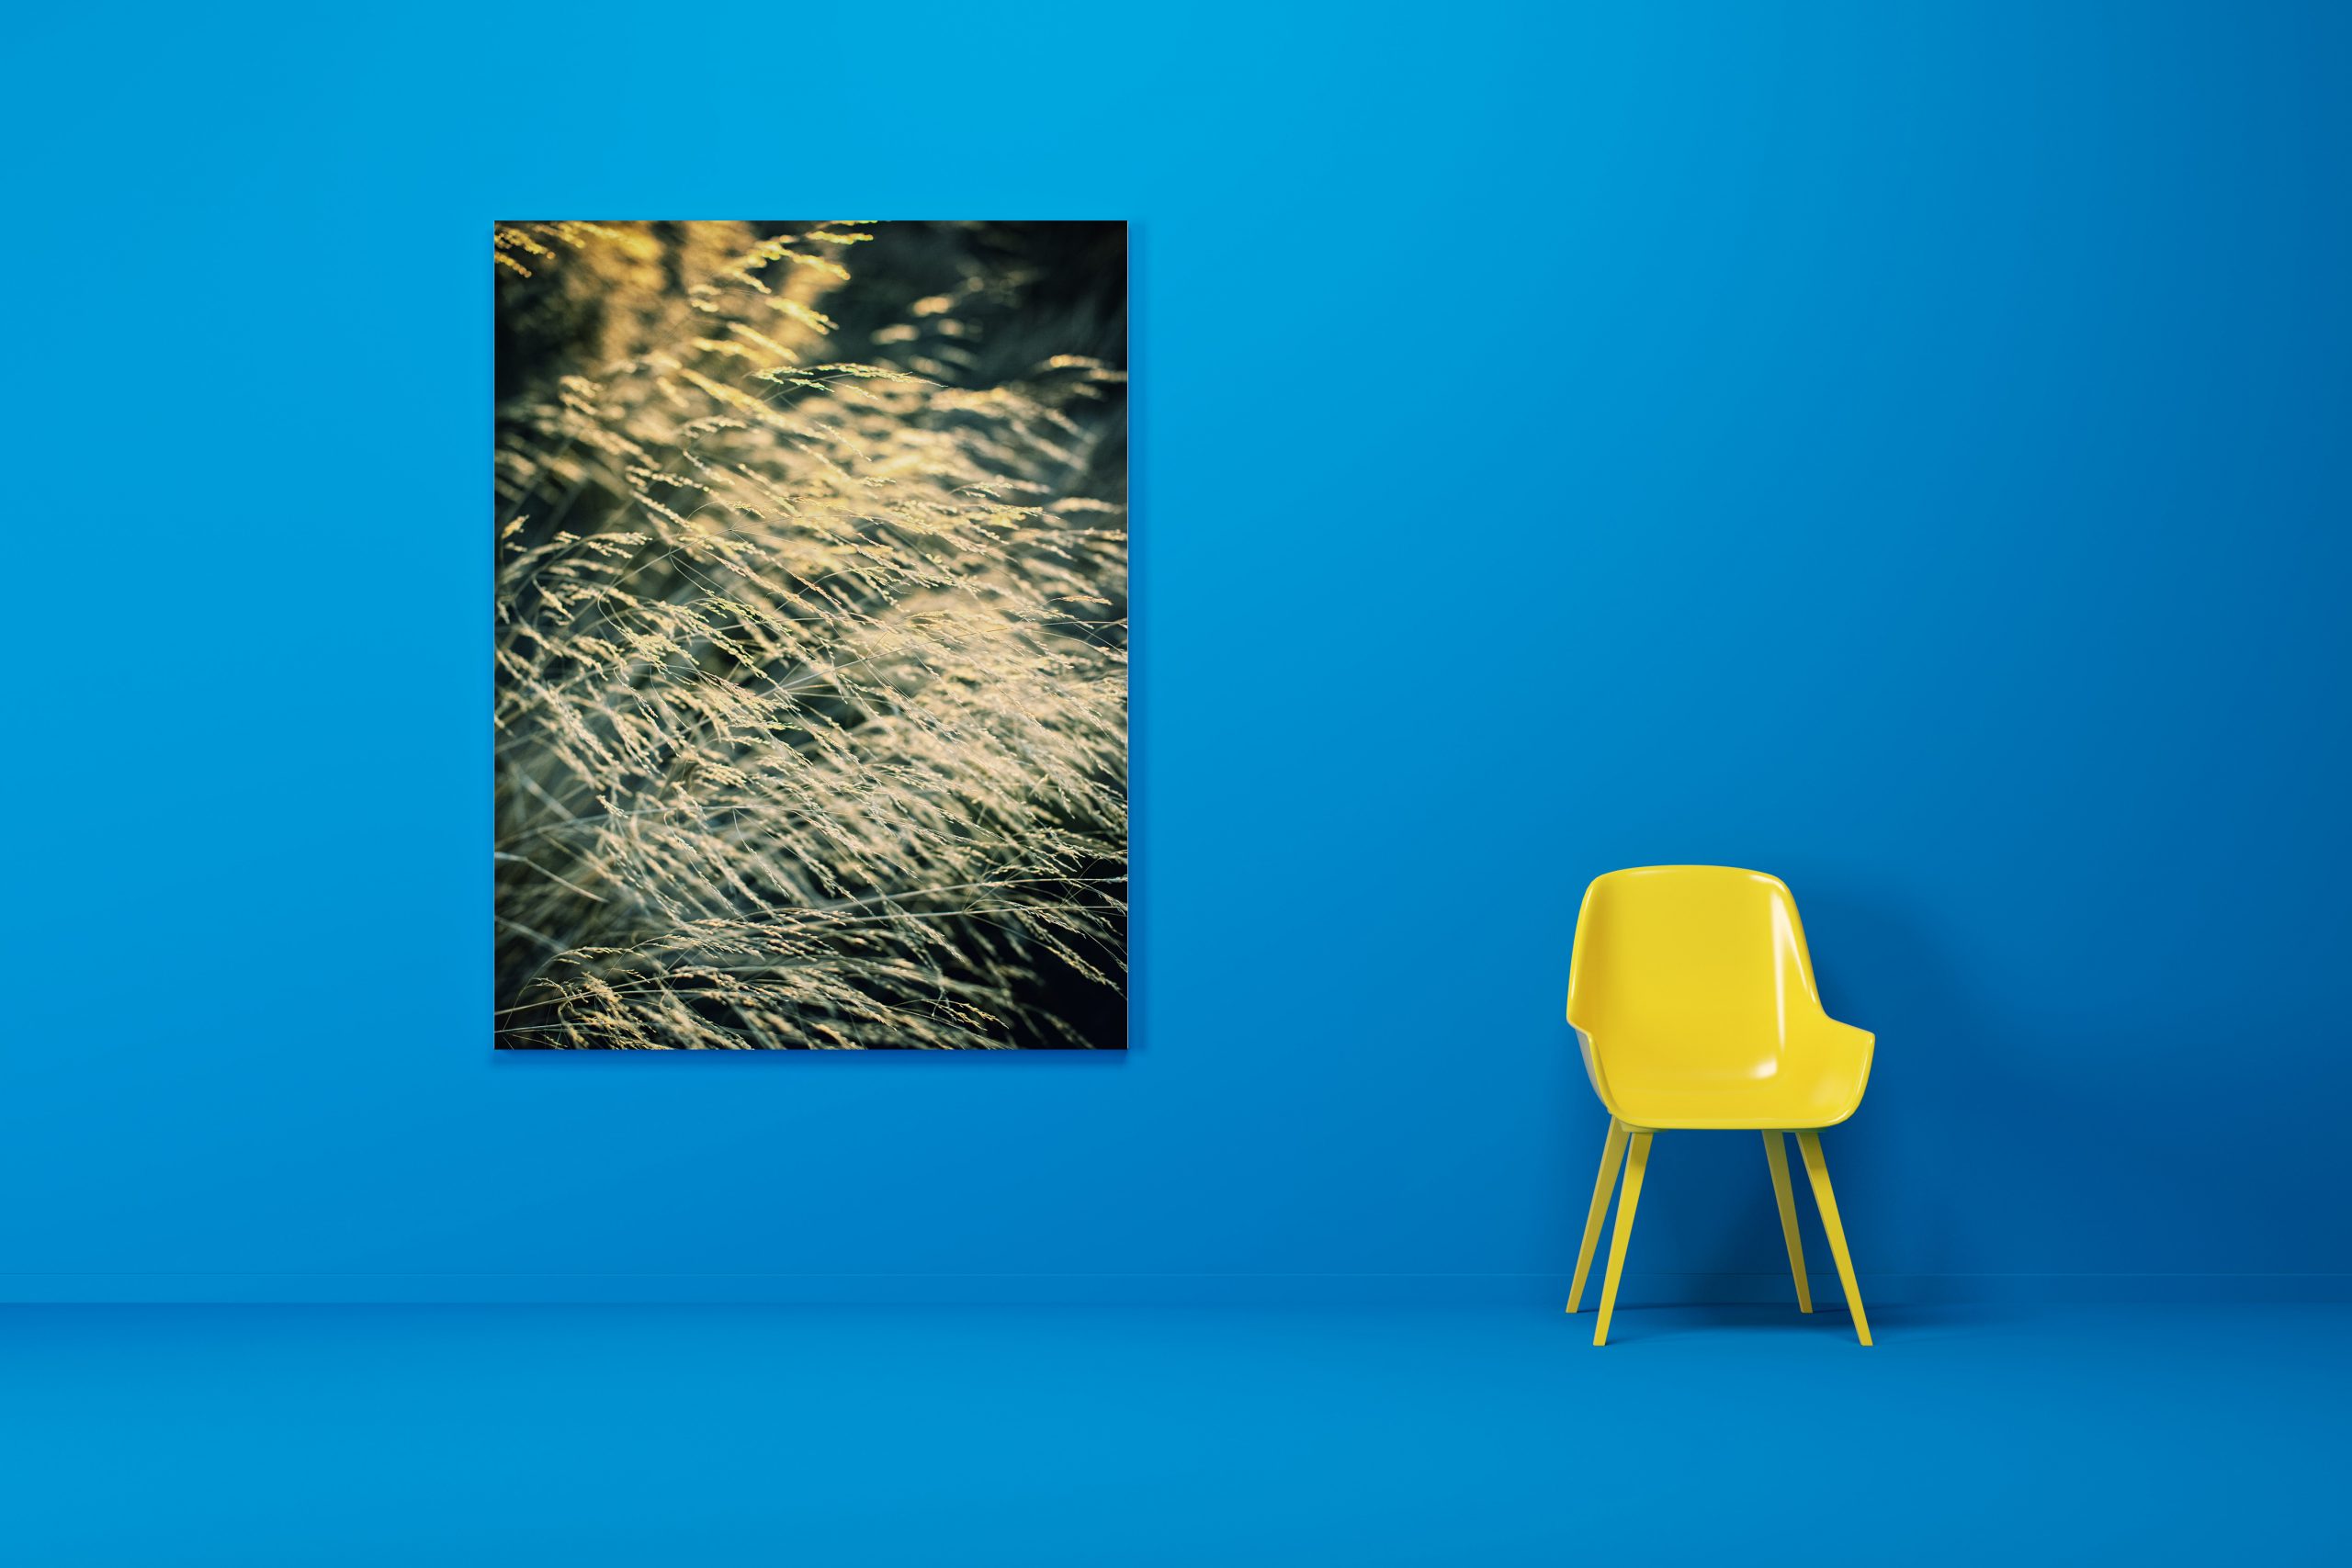 Blue room, yellow chair, poster